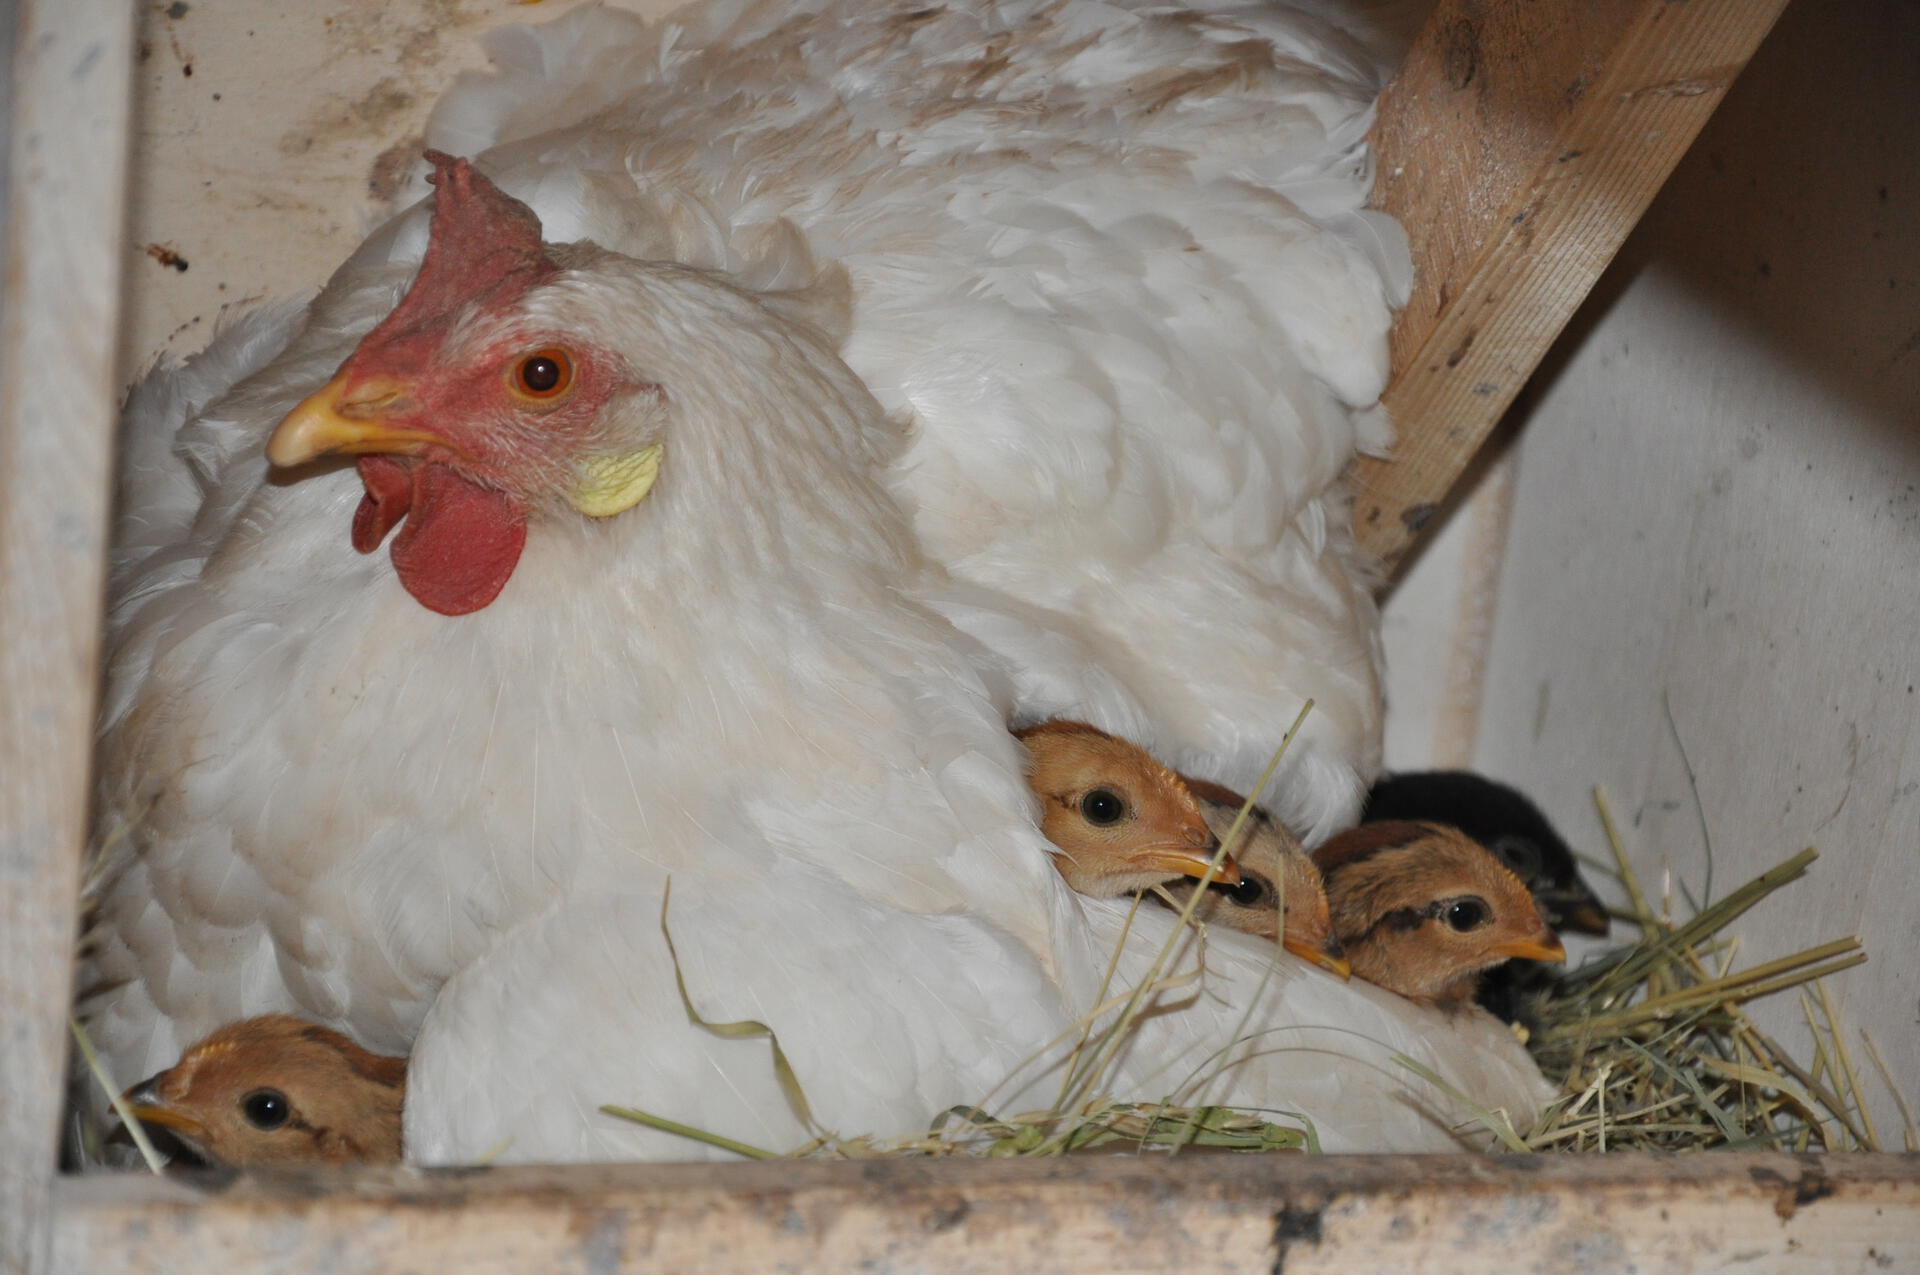 Mother hen with young chicks